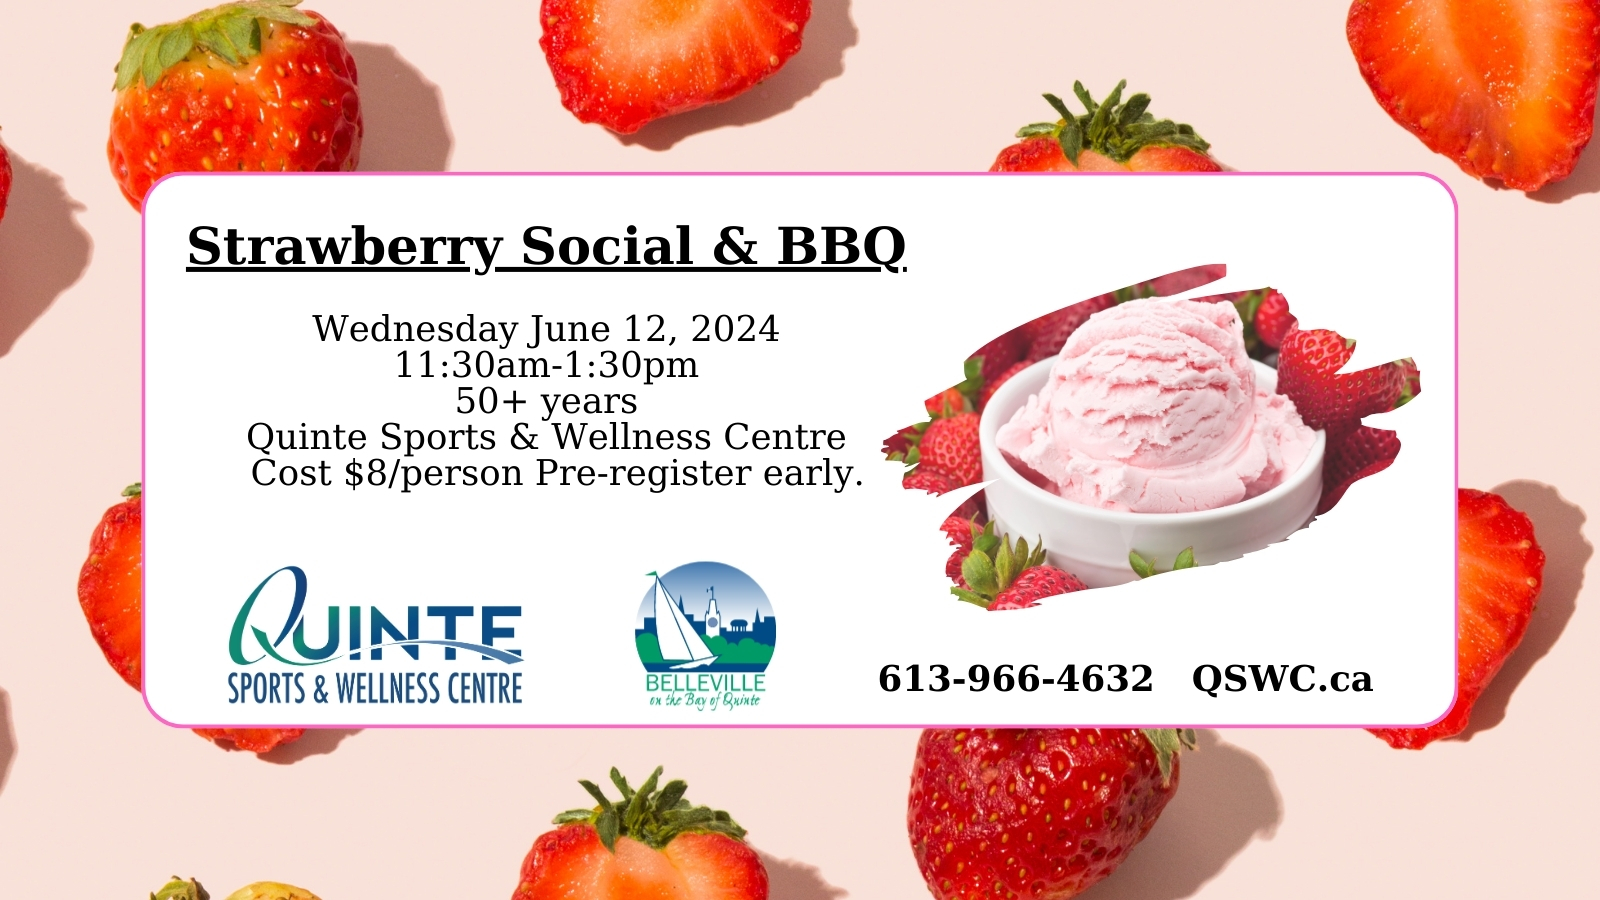 Poster titled "Strawberry Social" with photos of strawberries and event details